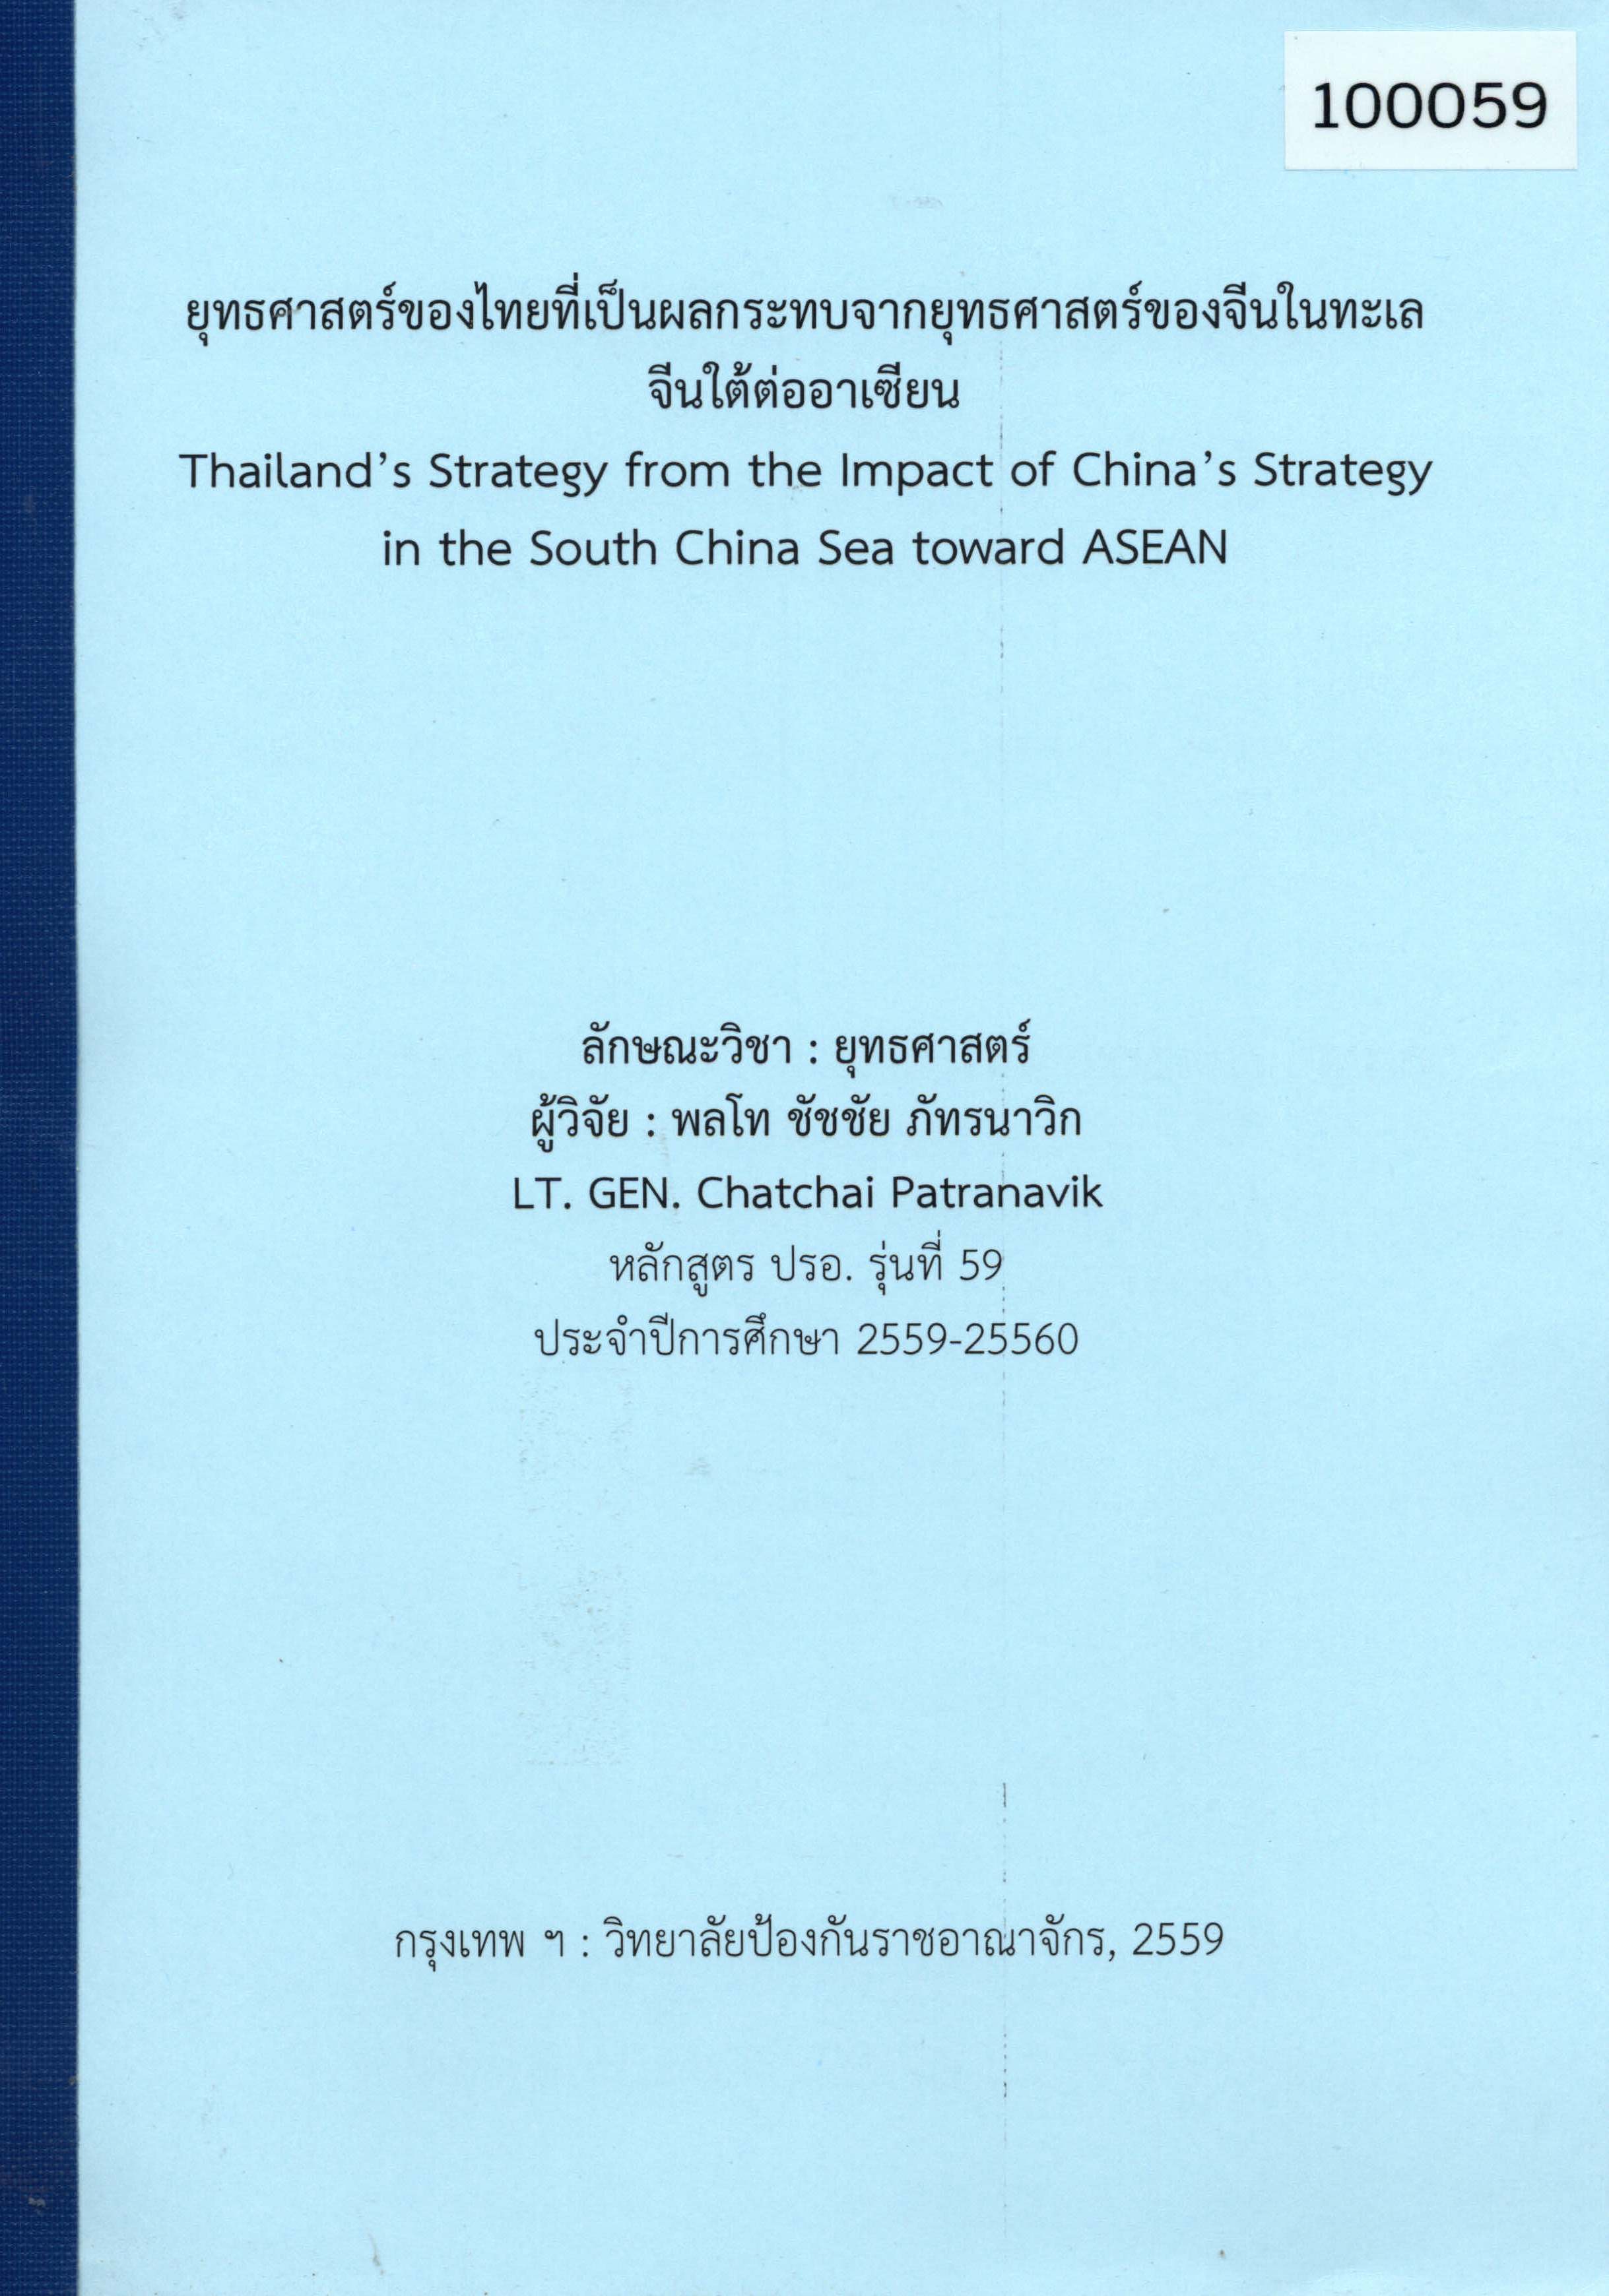 Thailand’s Strategy from the Impact of China’s Strategy in the South China Sea toward ASEAN